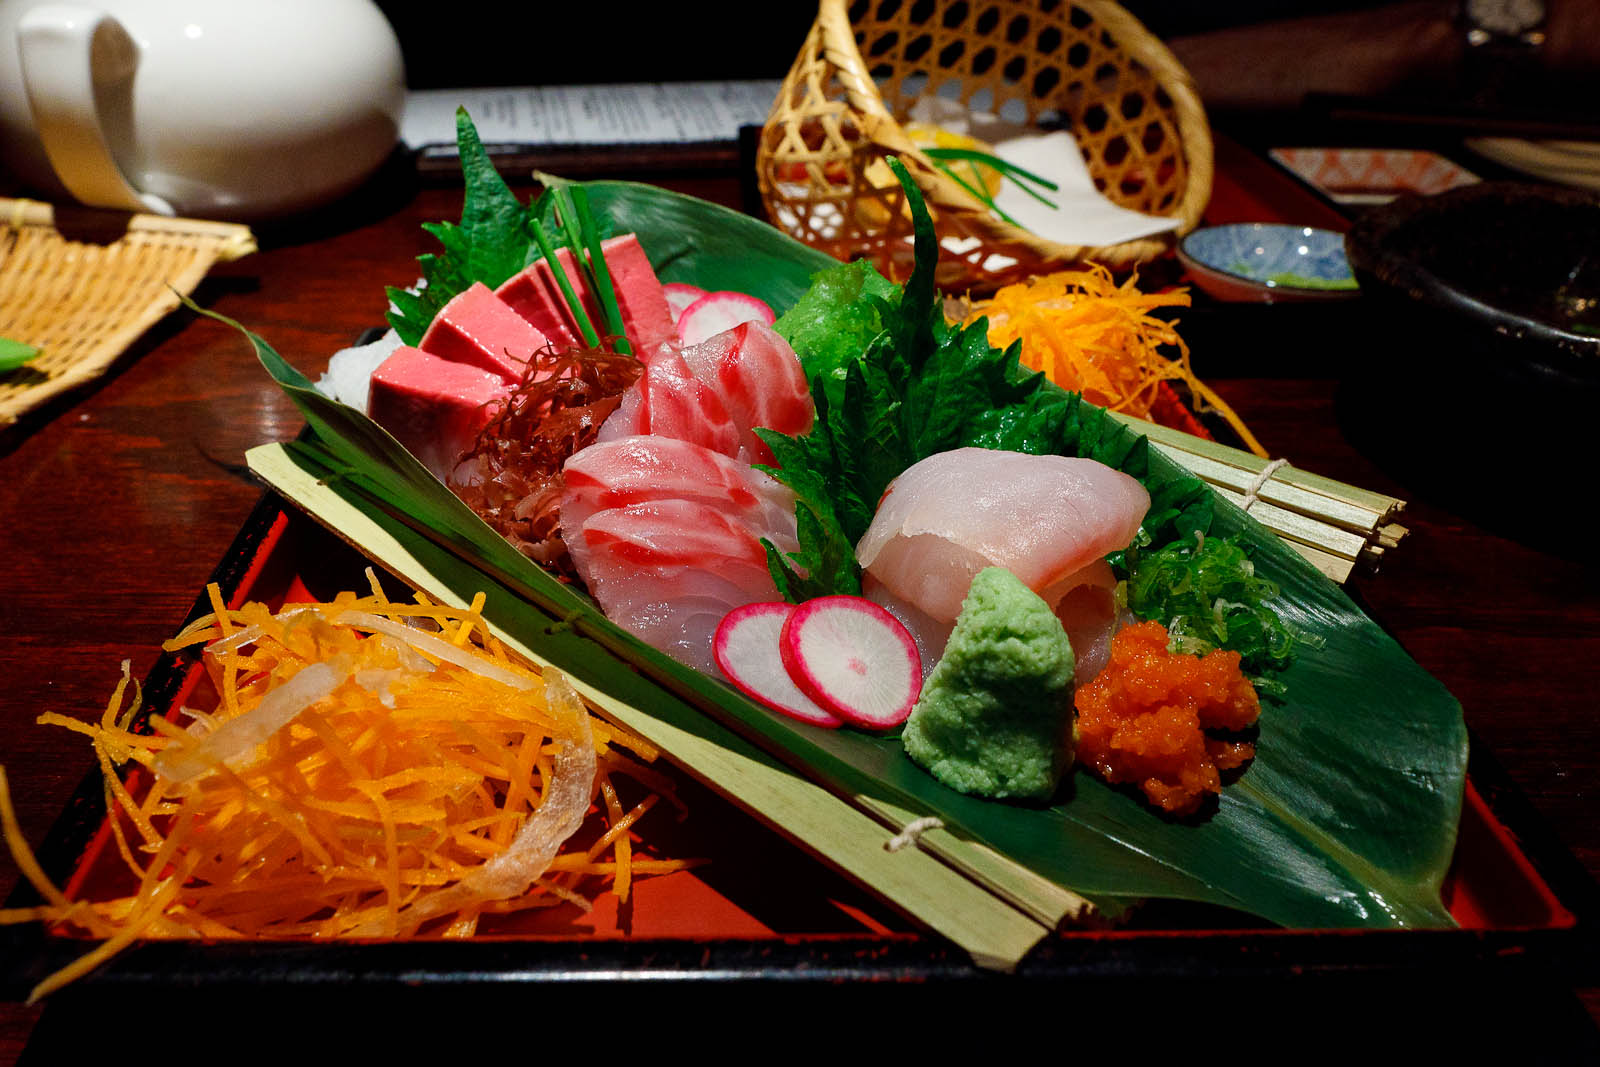 Red Jewel of the Day: Yellowtail, snapper, and fluke sashimi ($21)